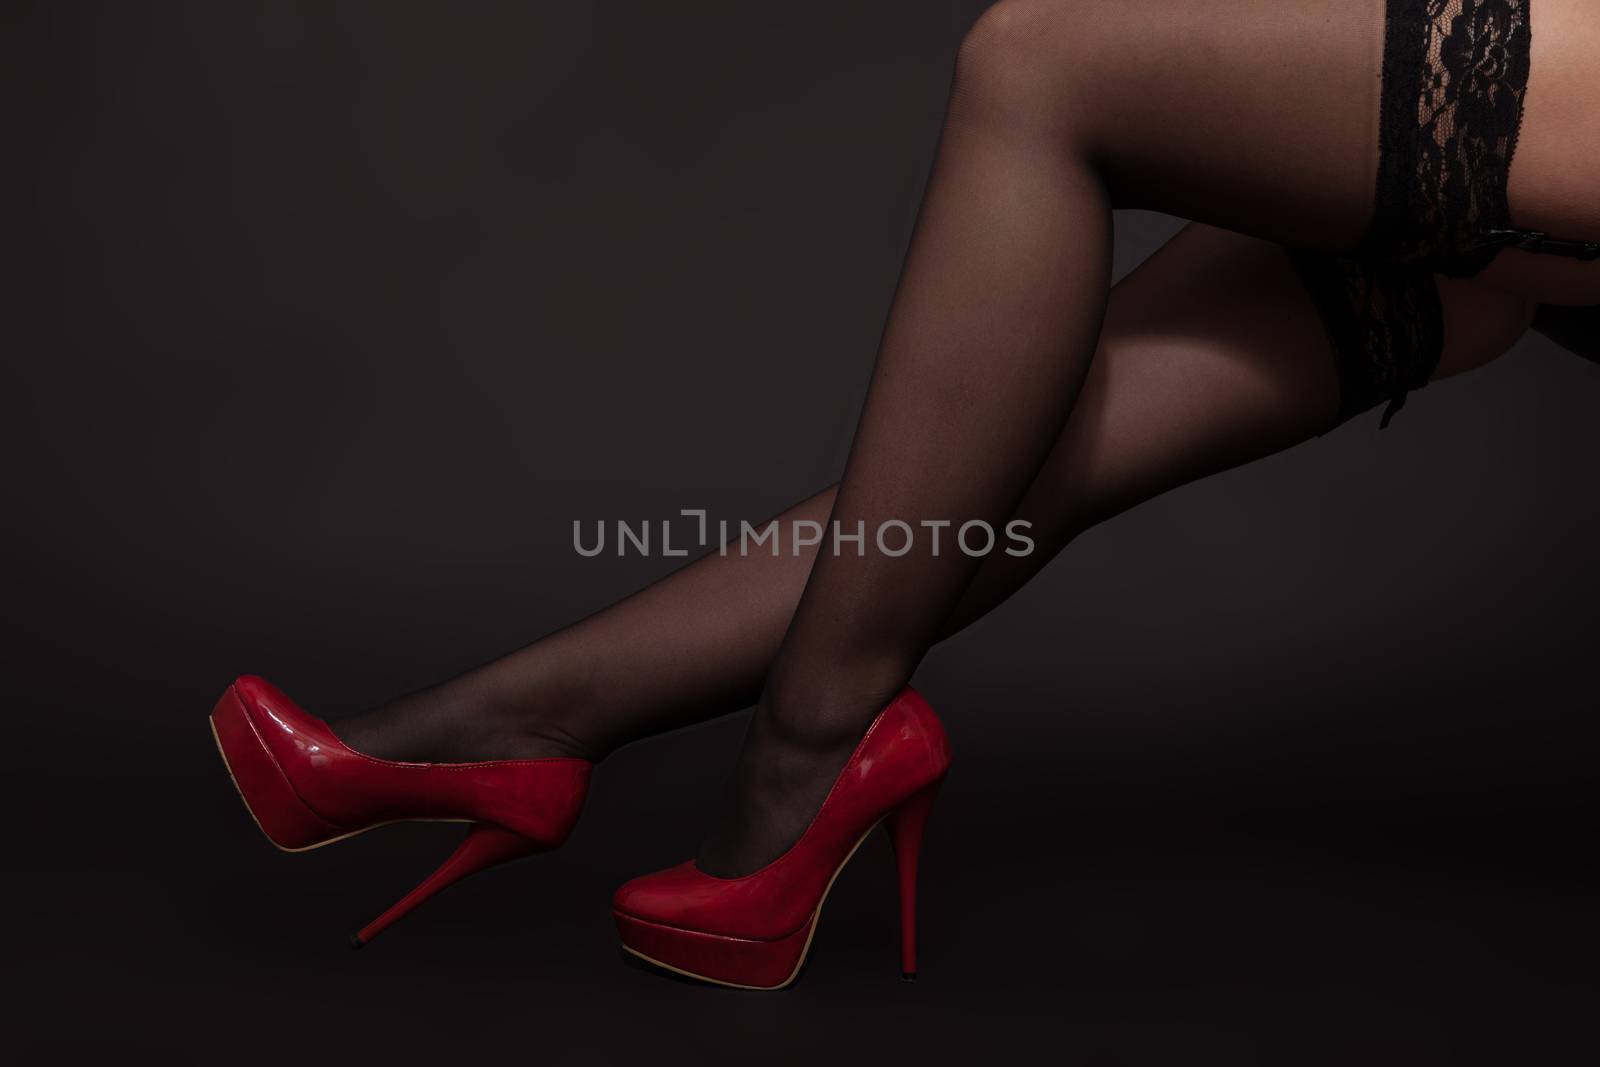 Legs of a woman in stockings and high heels